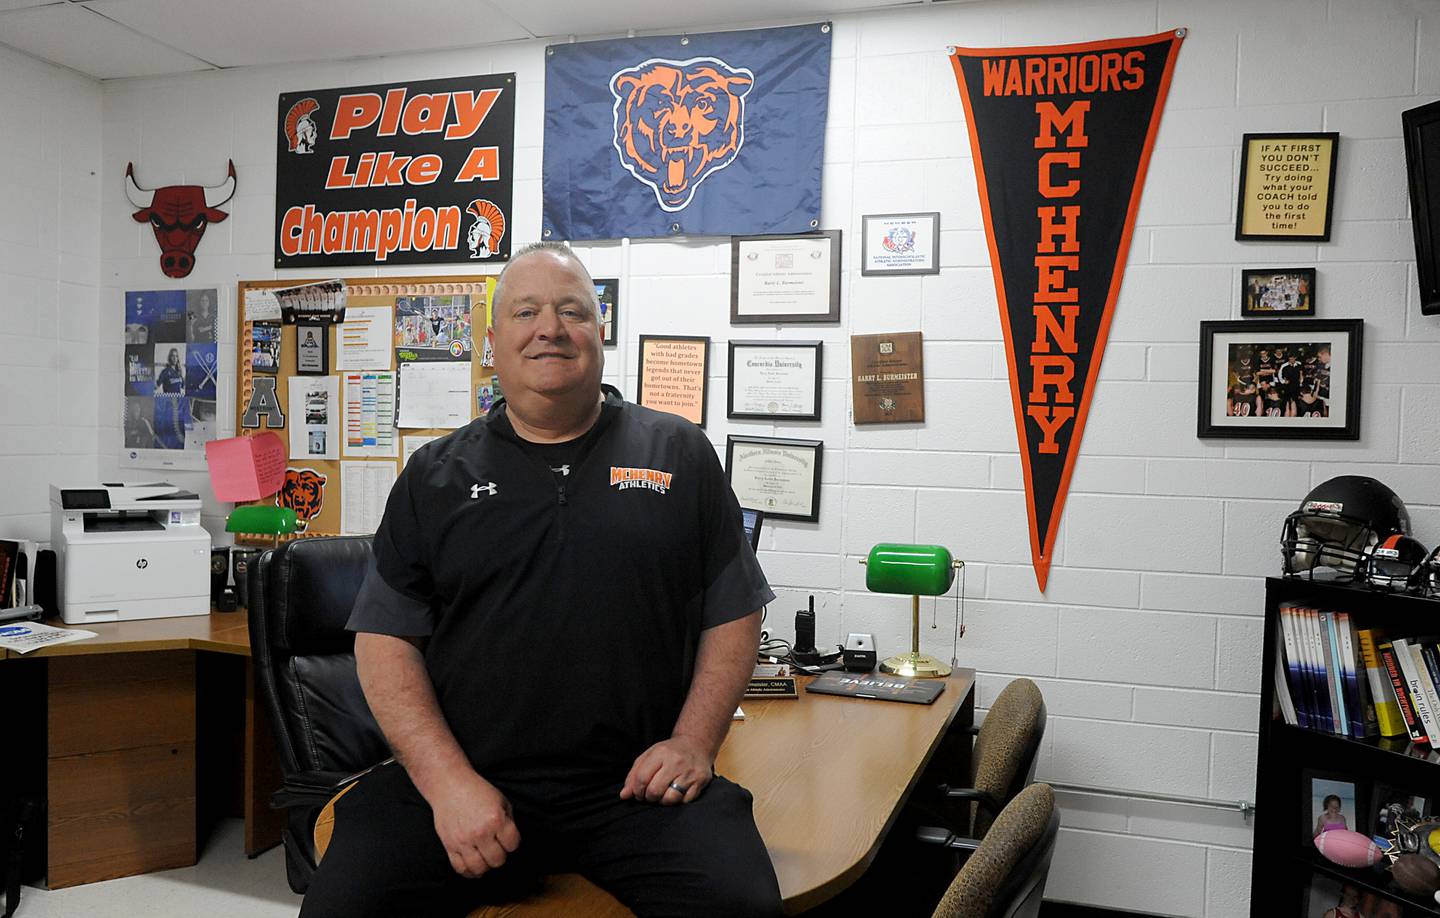 McHenry High School athletic director Barry Burmeister is retiring after 35 years as teacher, coach and administrator.